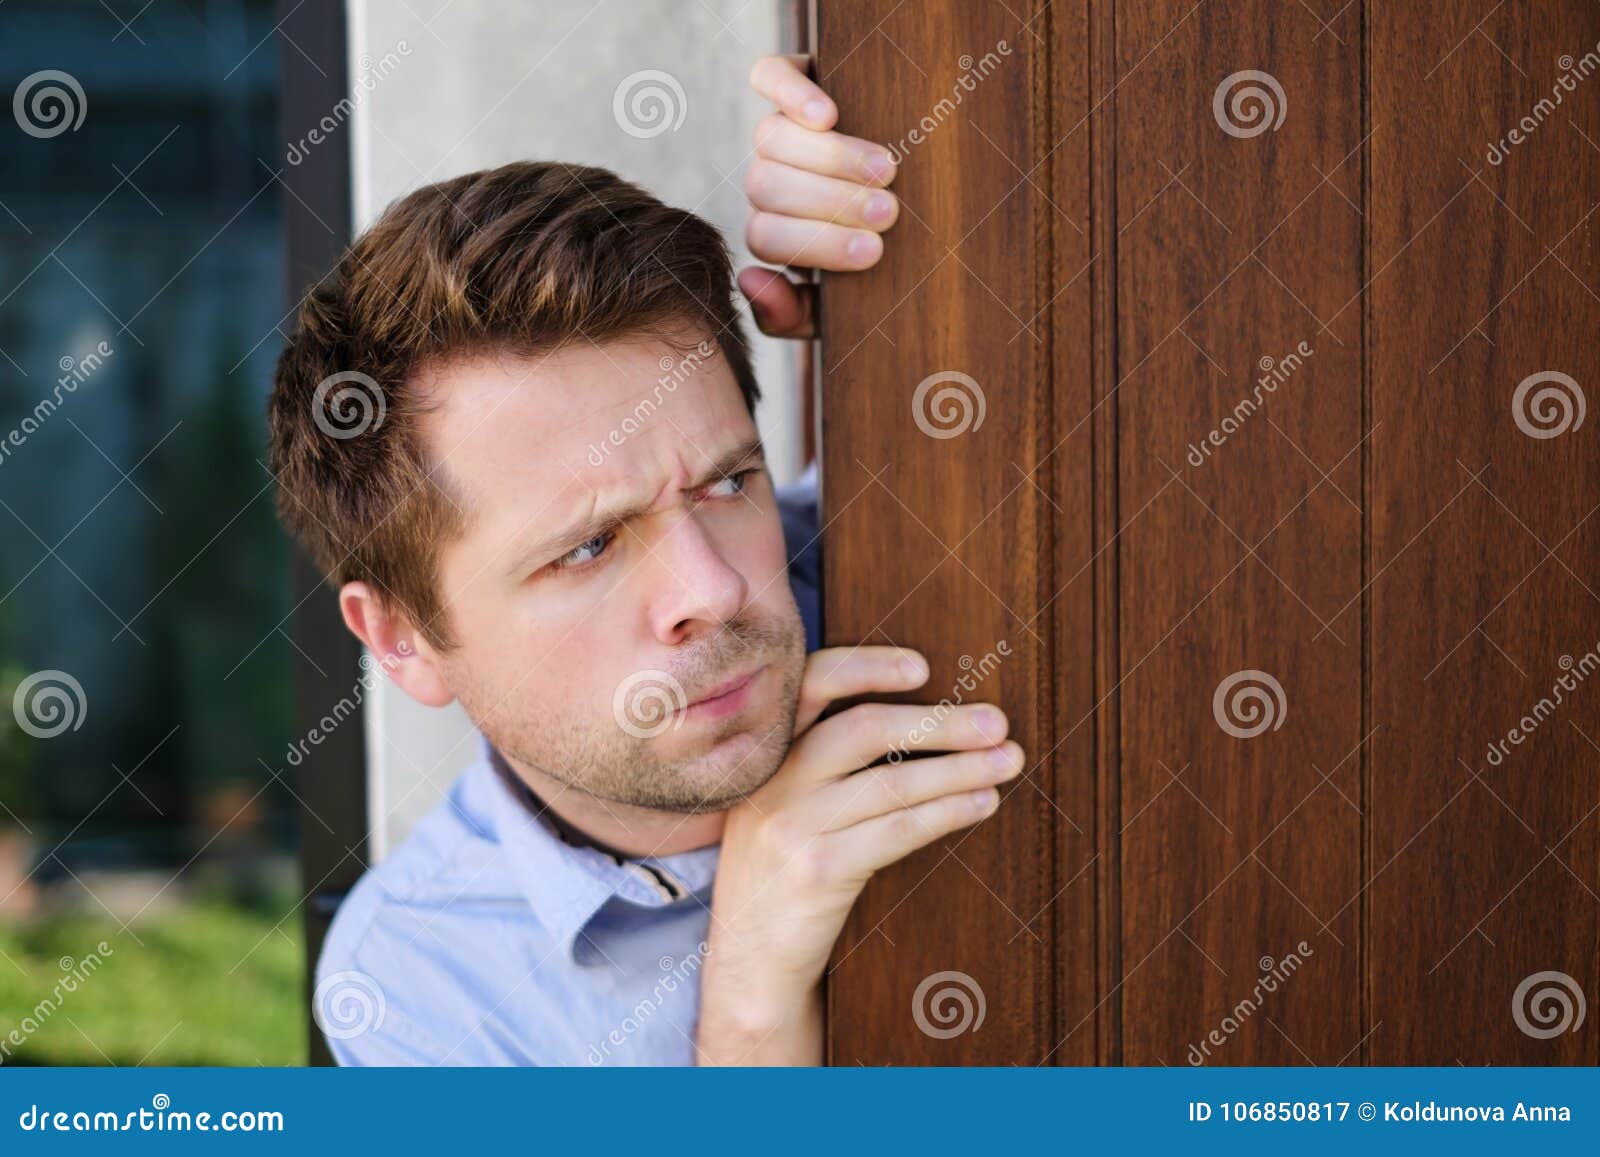 Young Caucasian Man With Agoraphobia Spying And Looking Out The Door